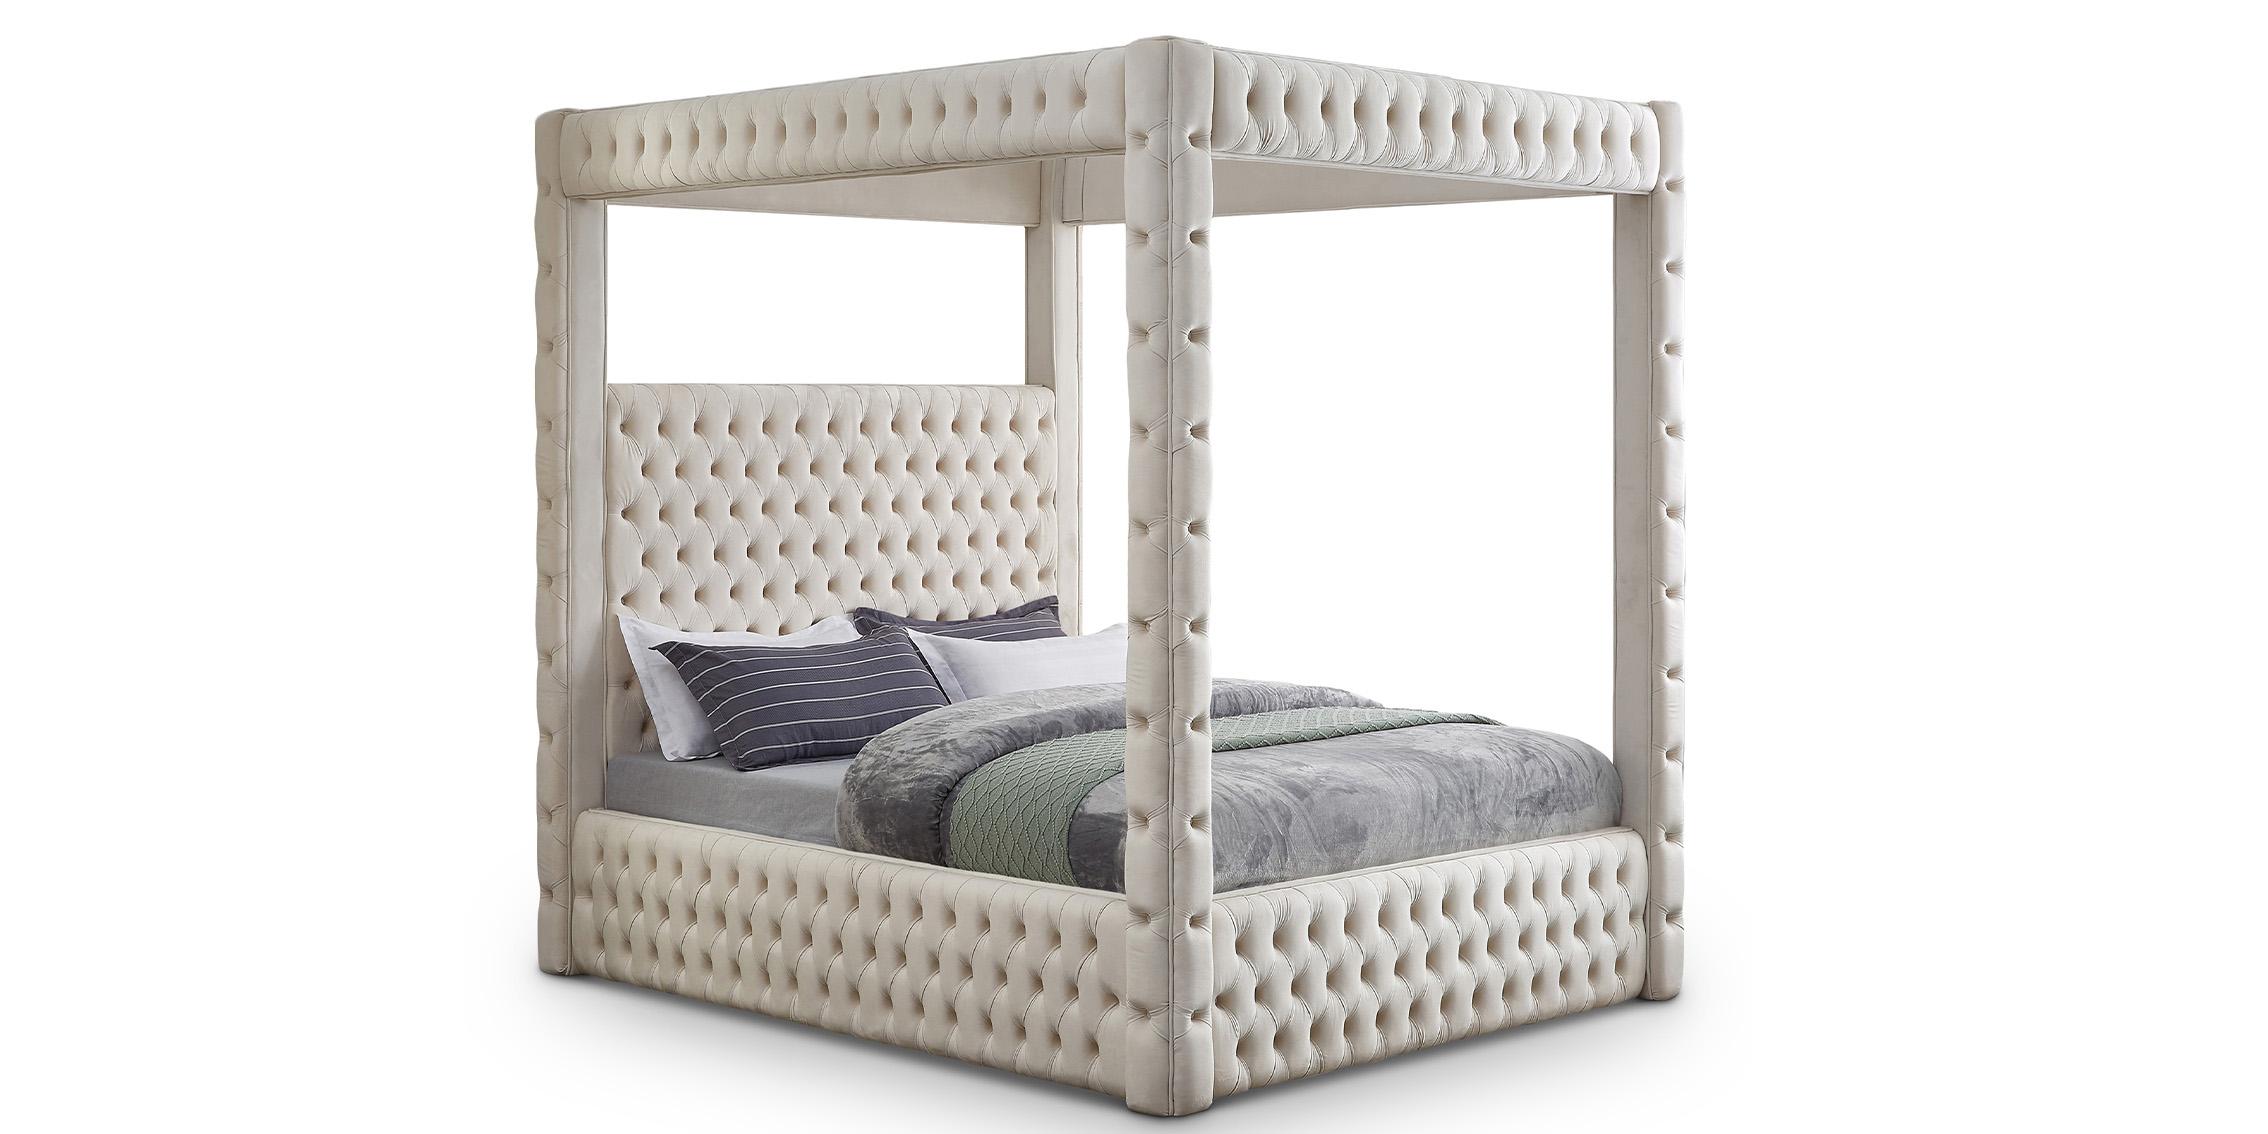 Meridian Furniture ROYAL RoyalCream-Q Canopy Bed